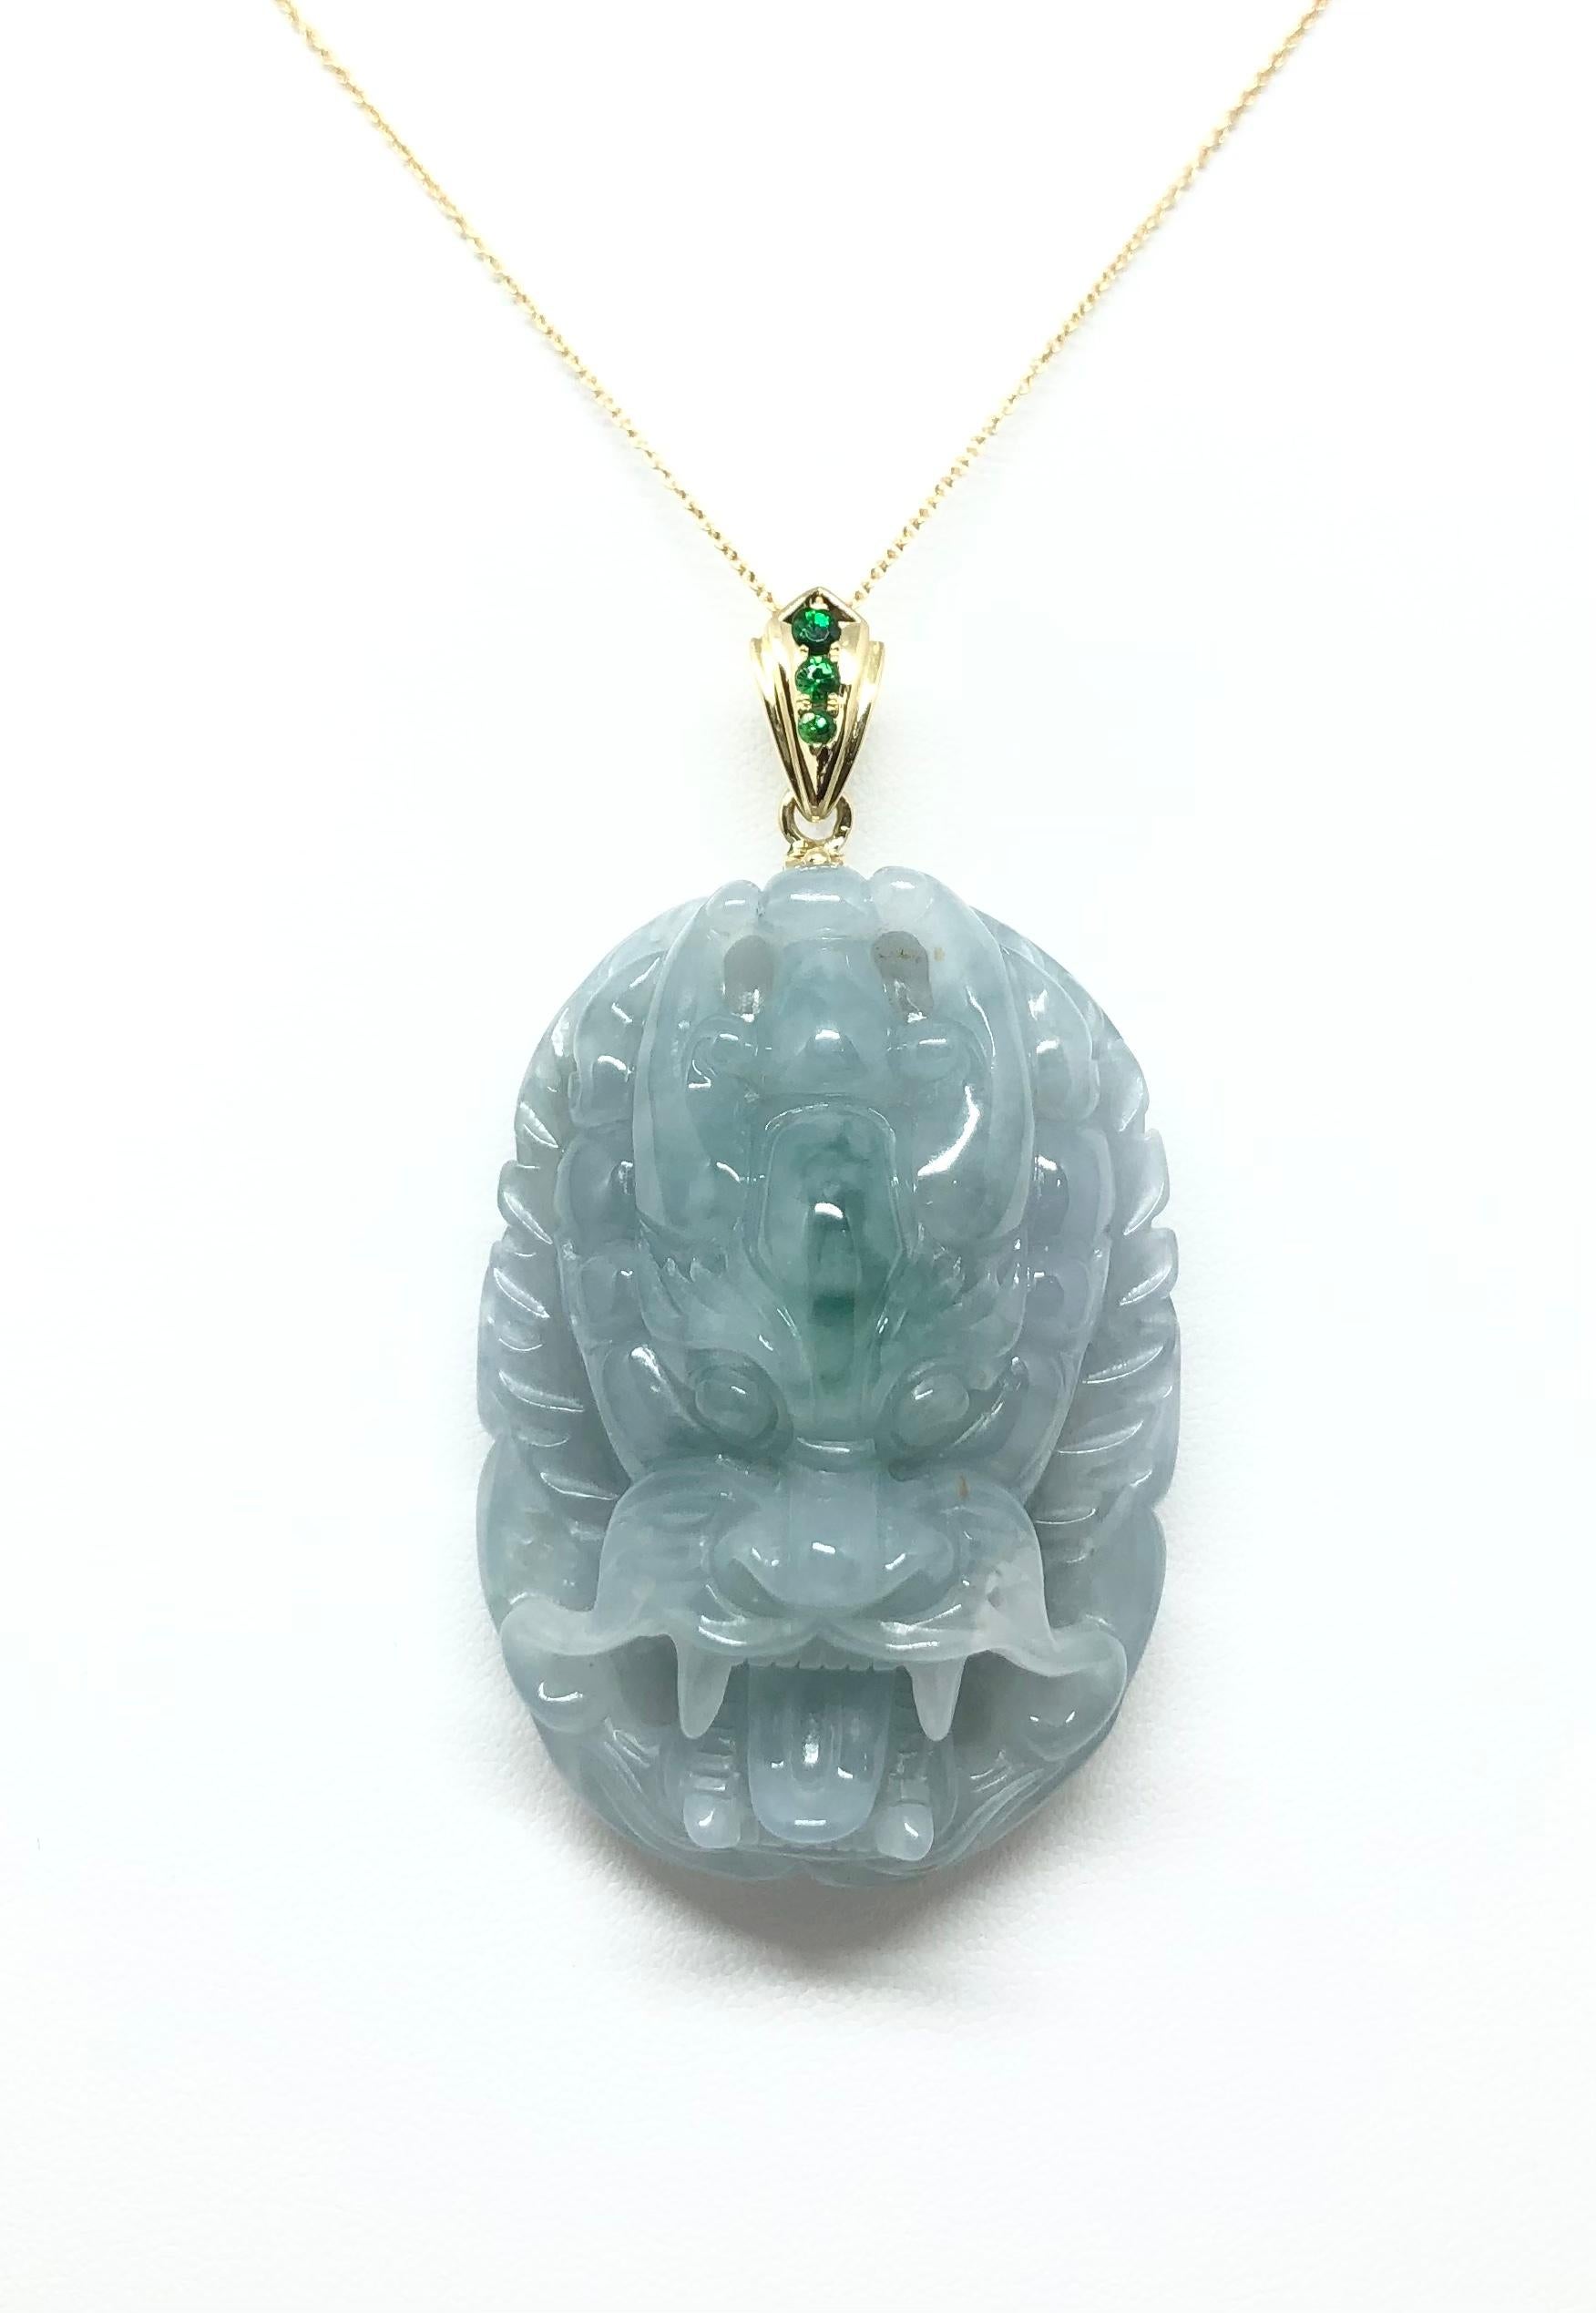 Jade with Tsavorite 0.20 carat Pendant set in 18 Karat Gold Settings
(chain not included)

Width: 3.8 cm 
Length: 6.3 cm
Total Weight: 65.57 grams

